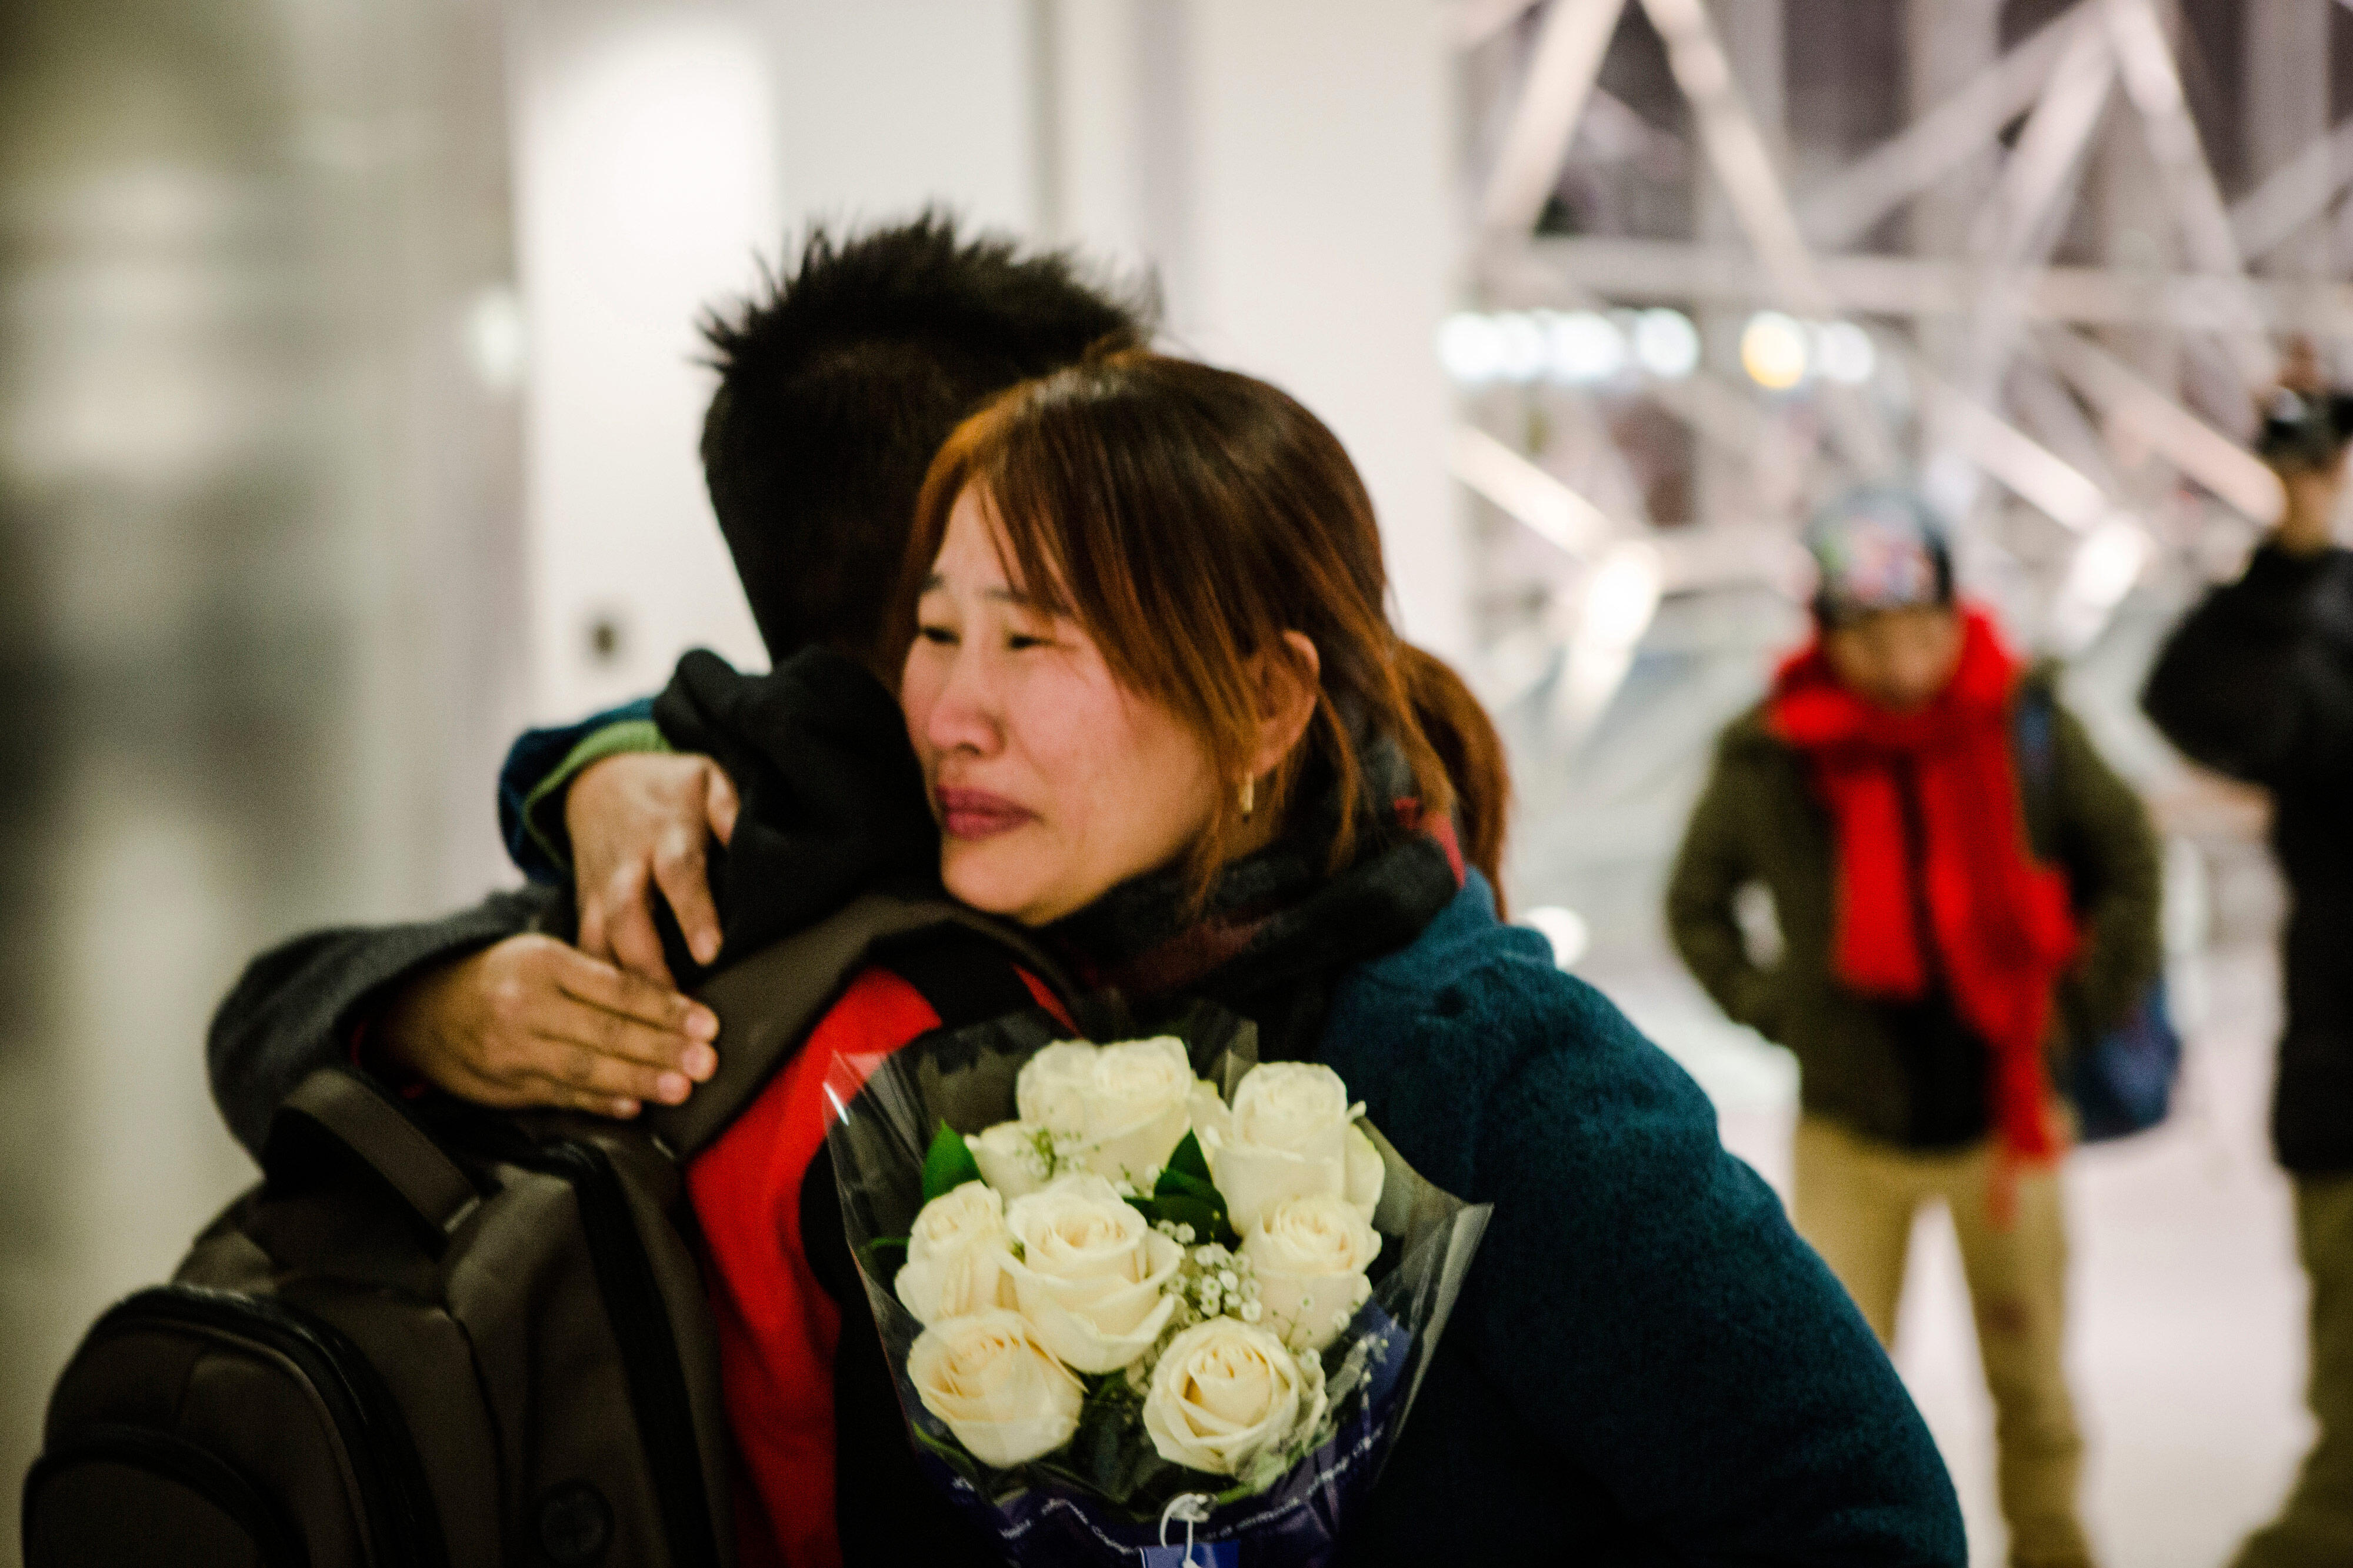 Crying mother hugs son while holding flowers at the airport.